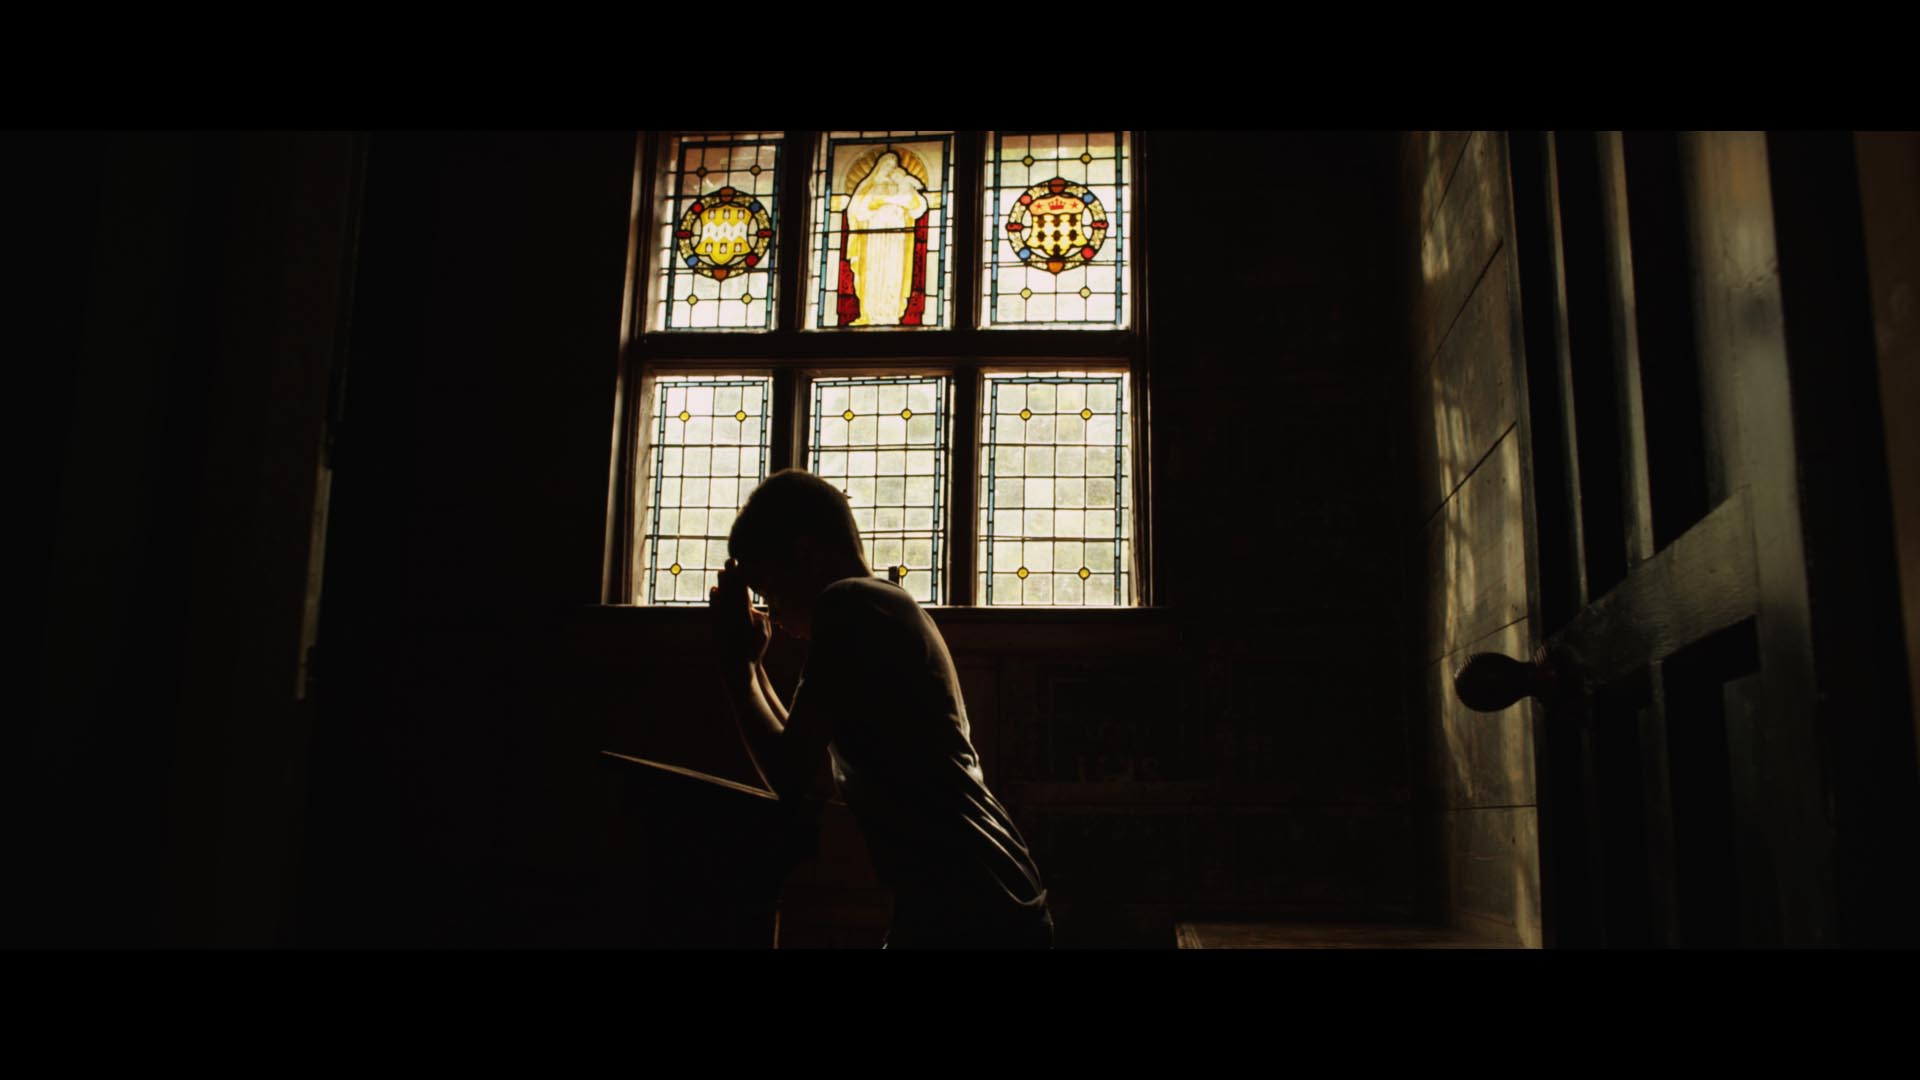 An OFFICIAL still from The Forbidden Note, directed by Callum Andrew Johnston.